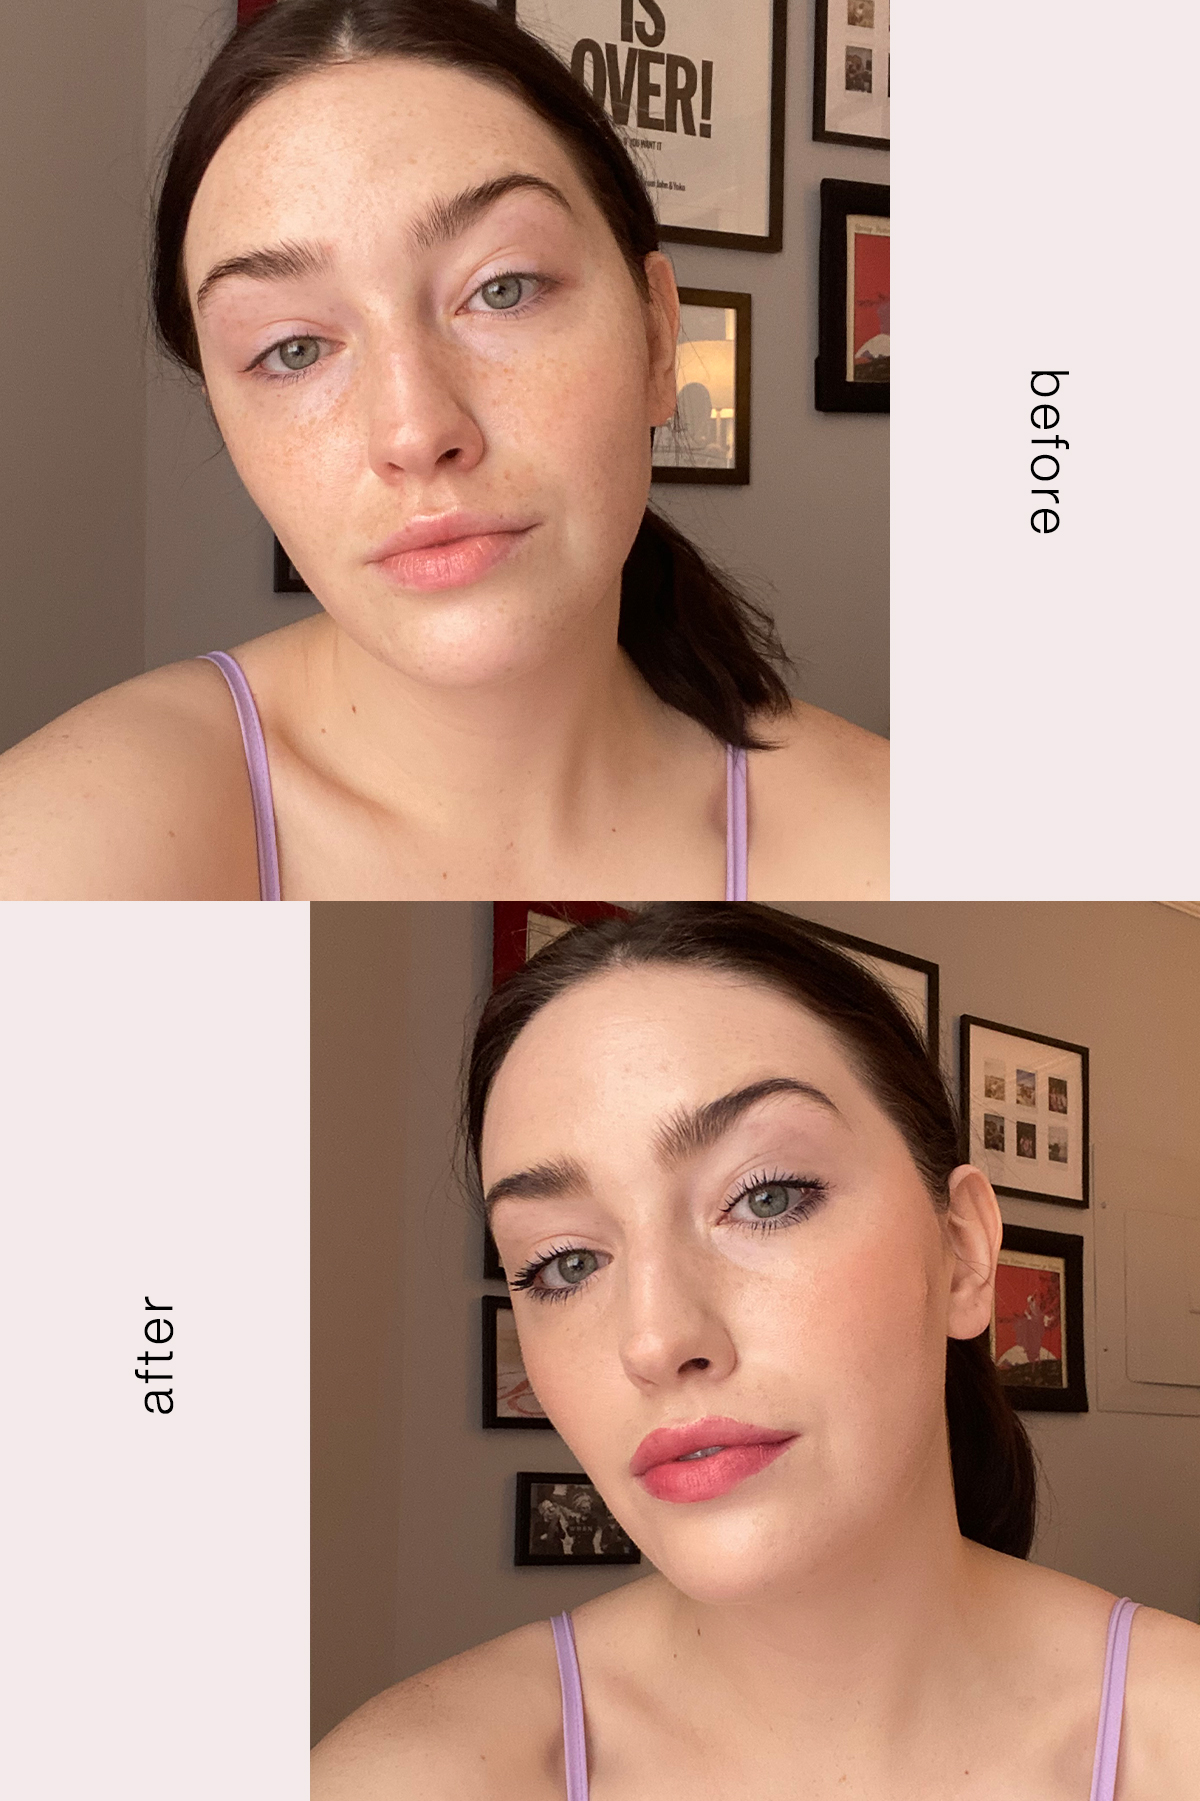 Make Up For Ever Review: A New Cosmetics King?